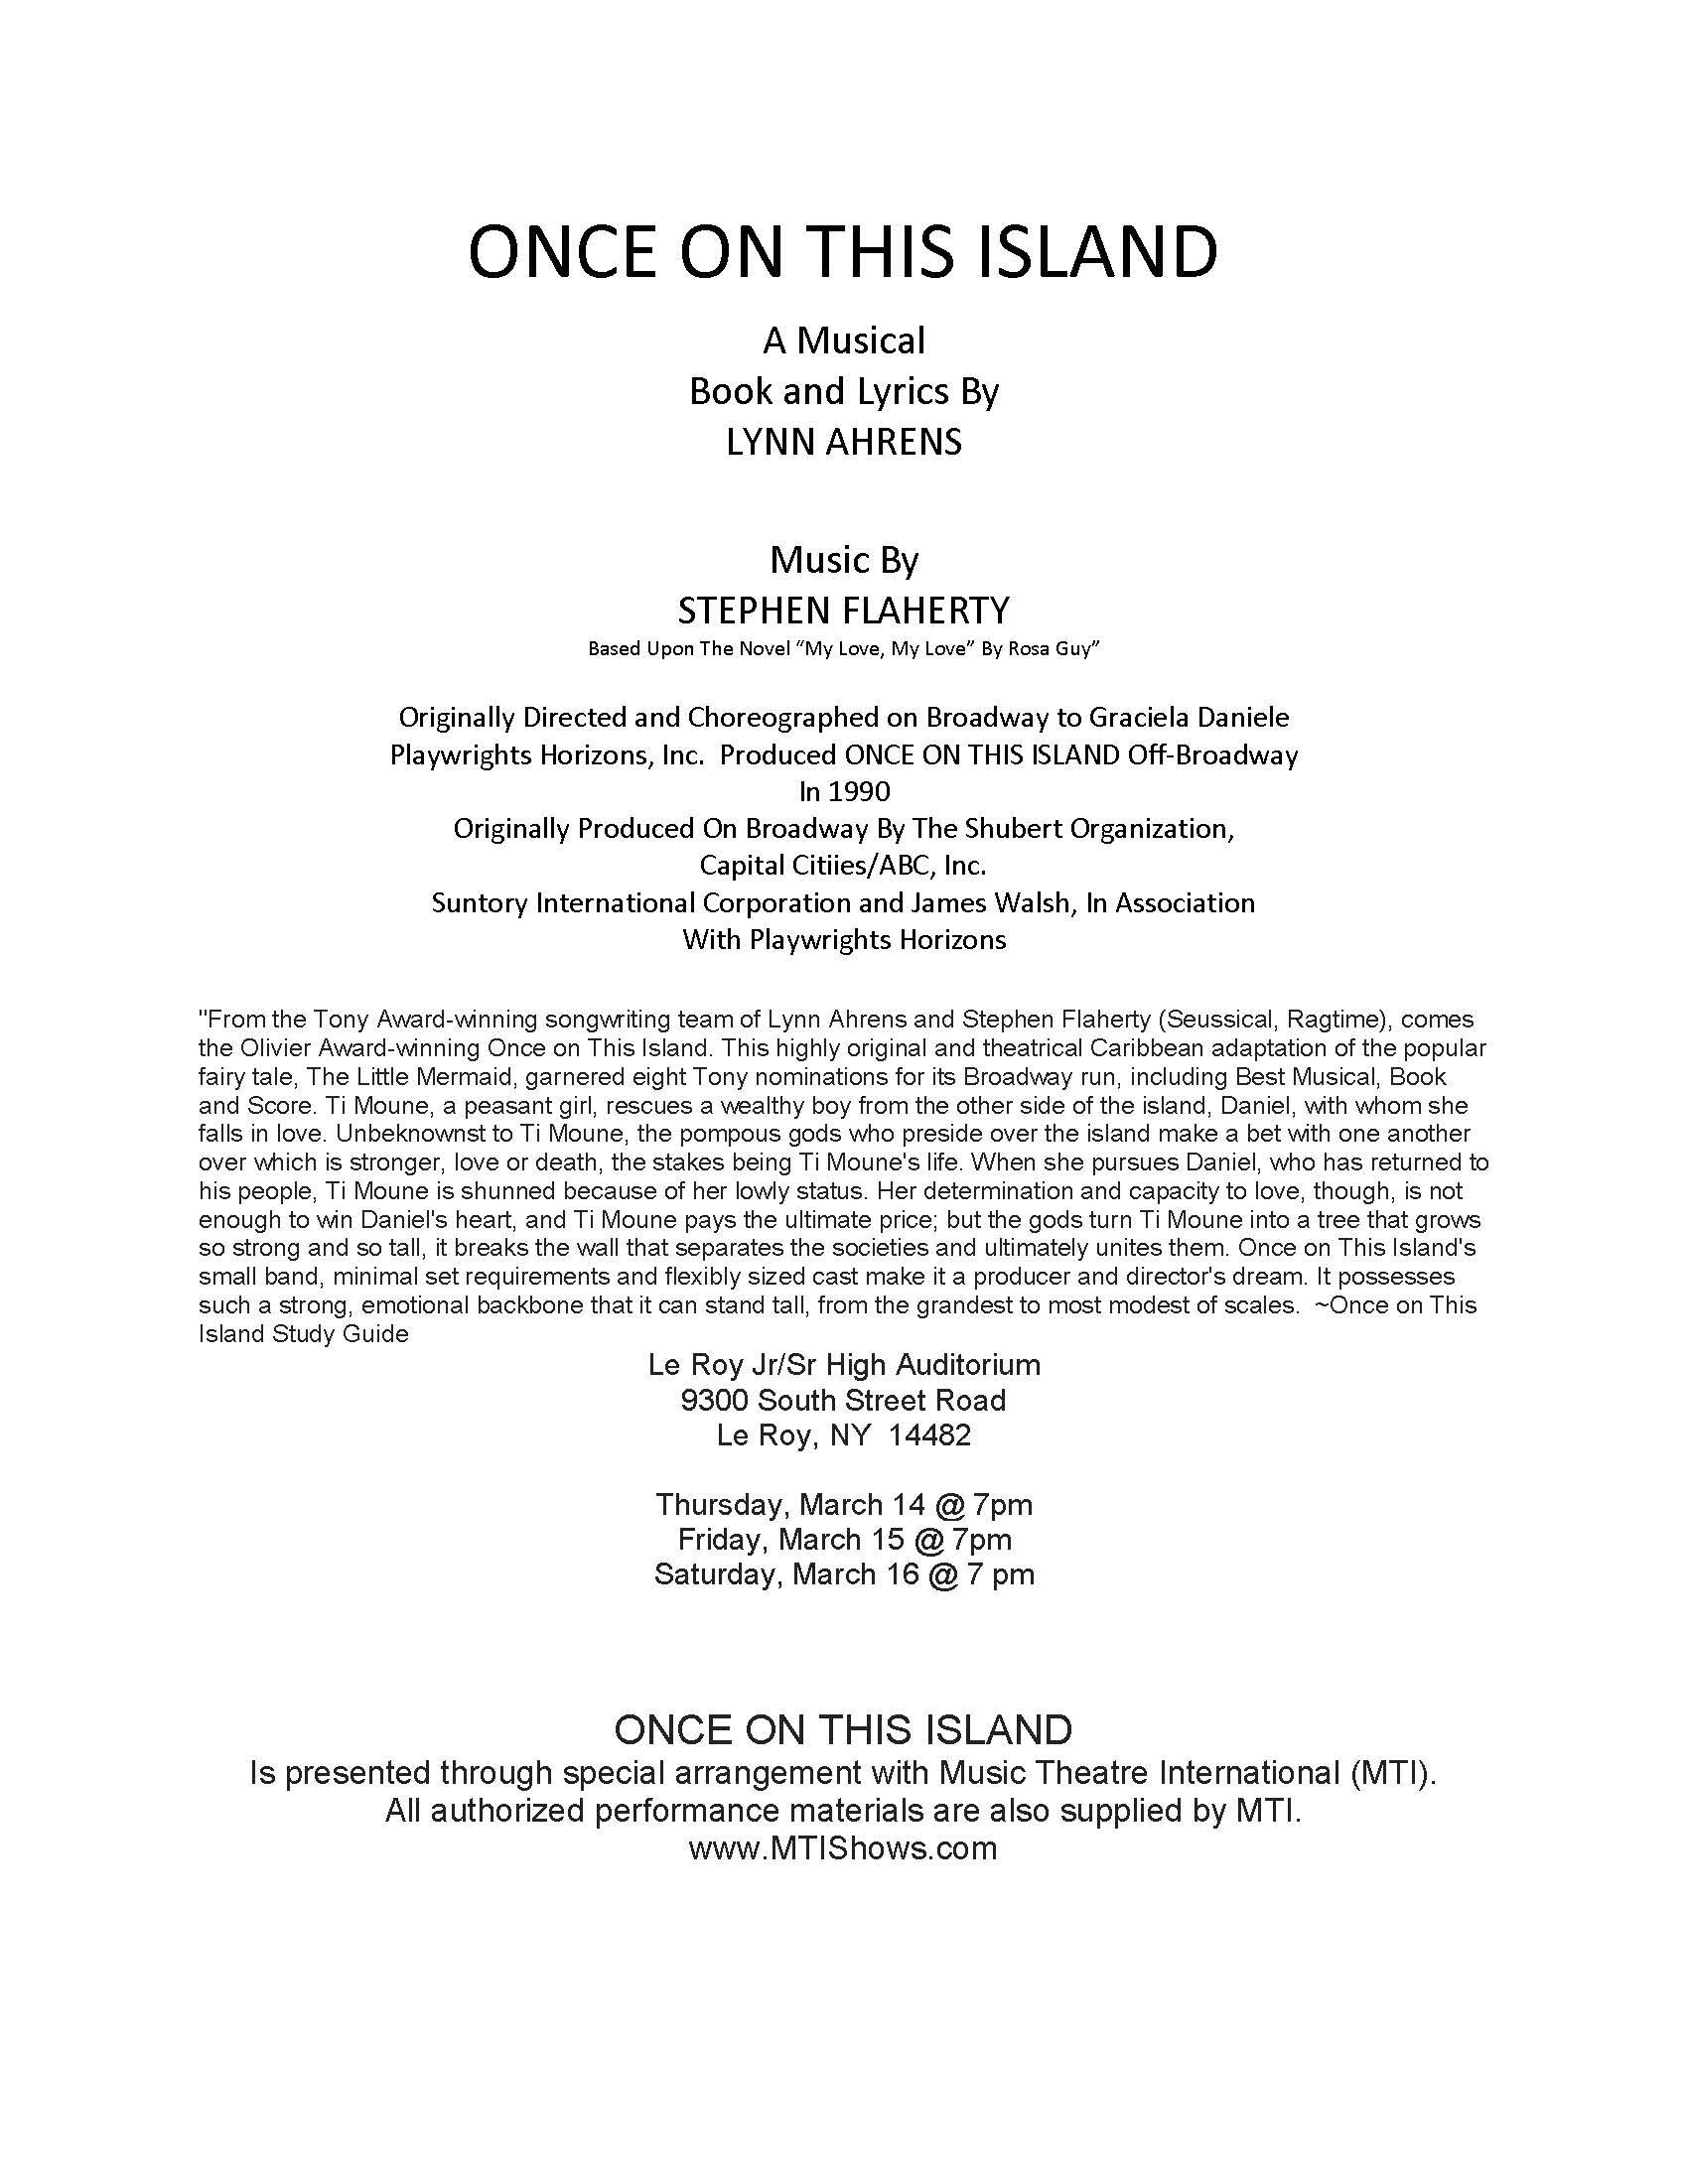 Billing Info for Musical Once on this Island